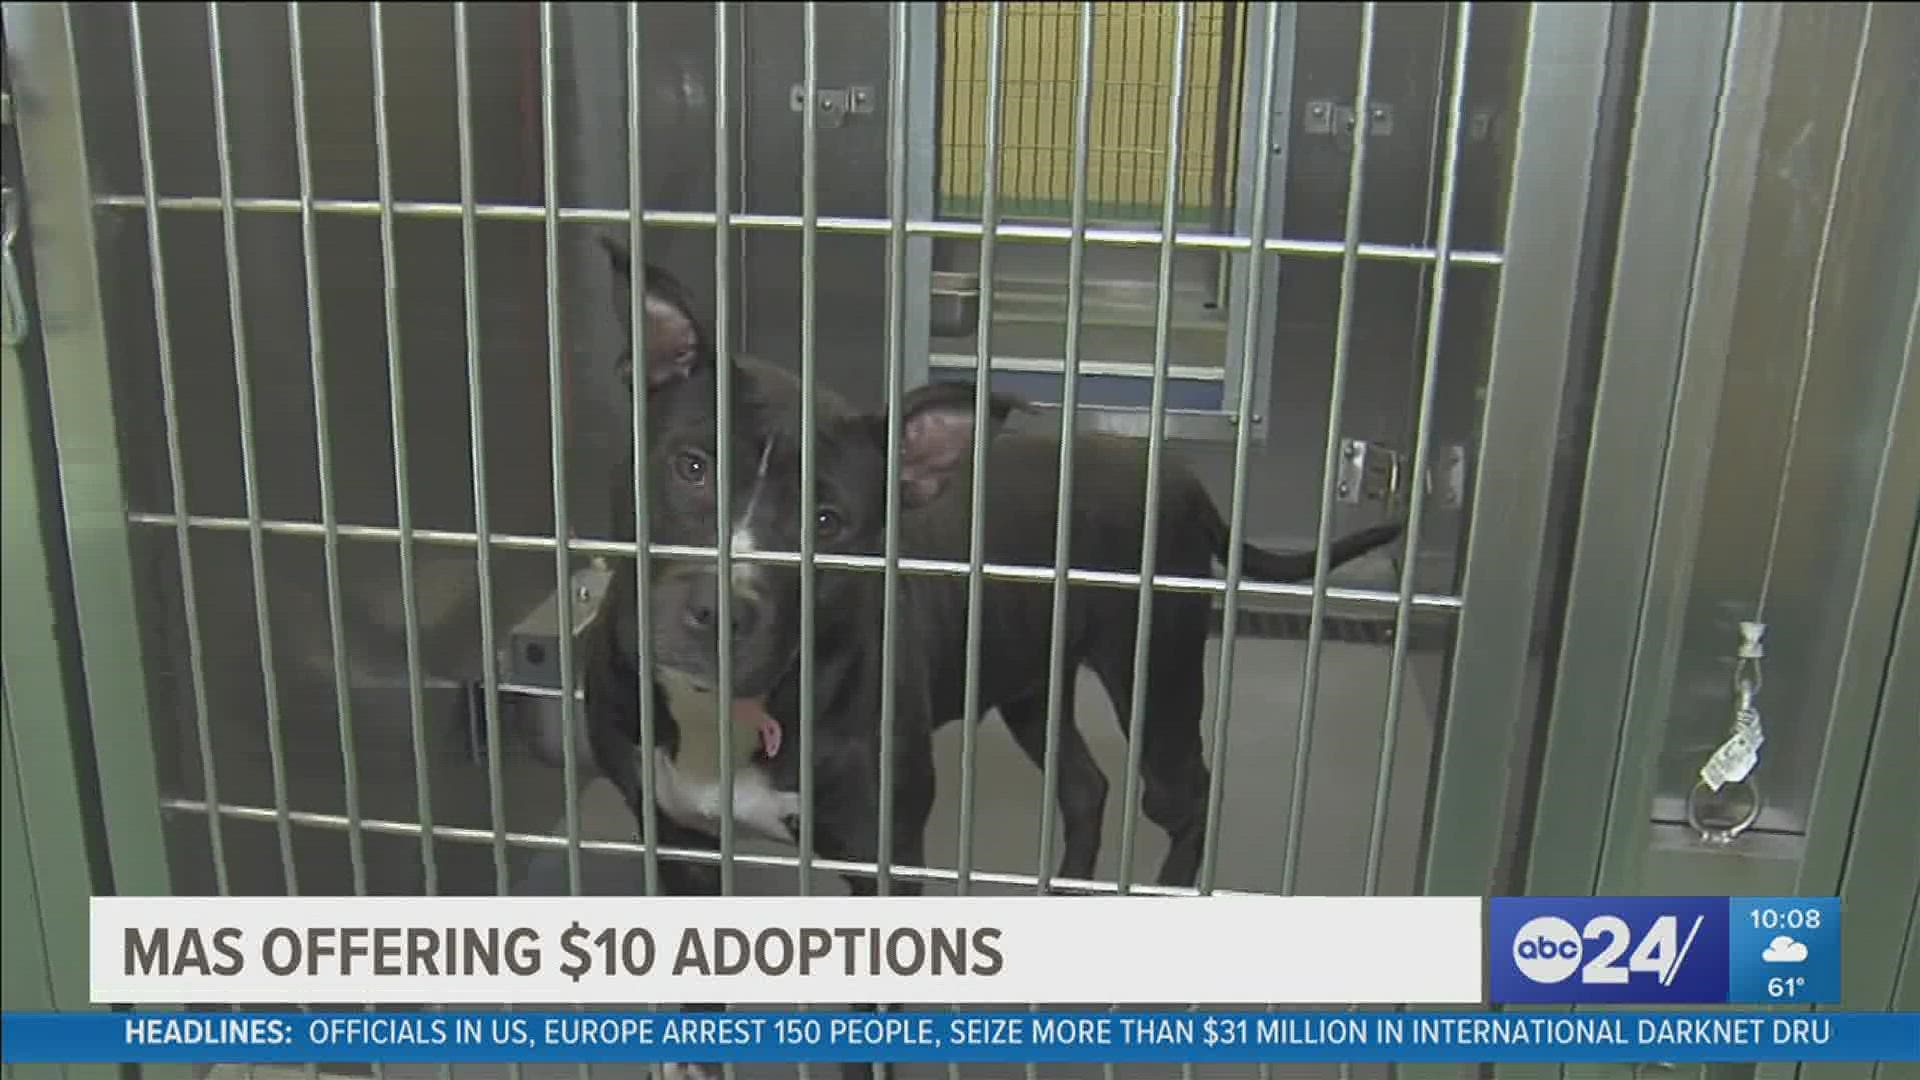 Memphis Animal Services said it has about 300 animals onsite at the shelter and another 250 in foster homes.